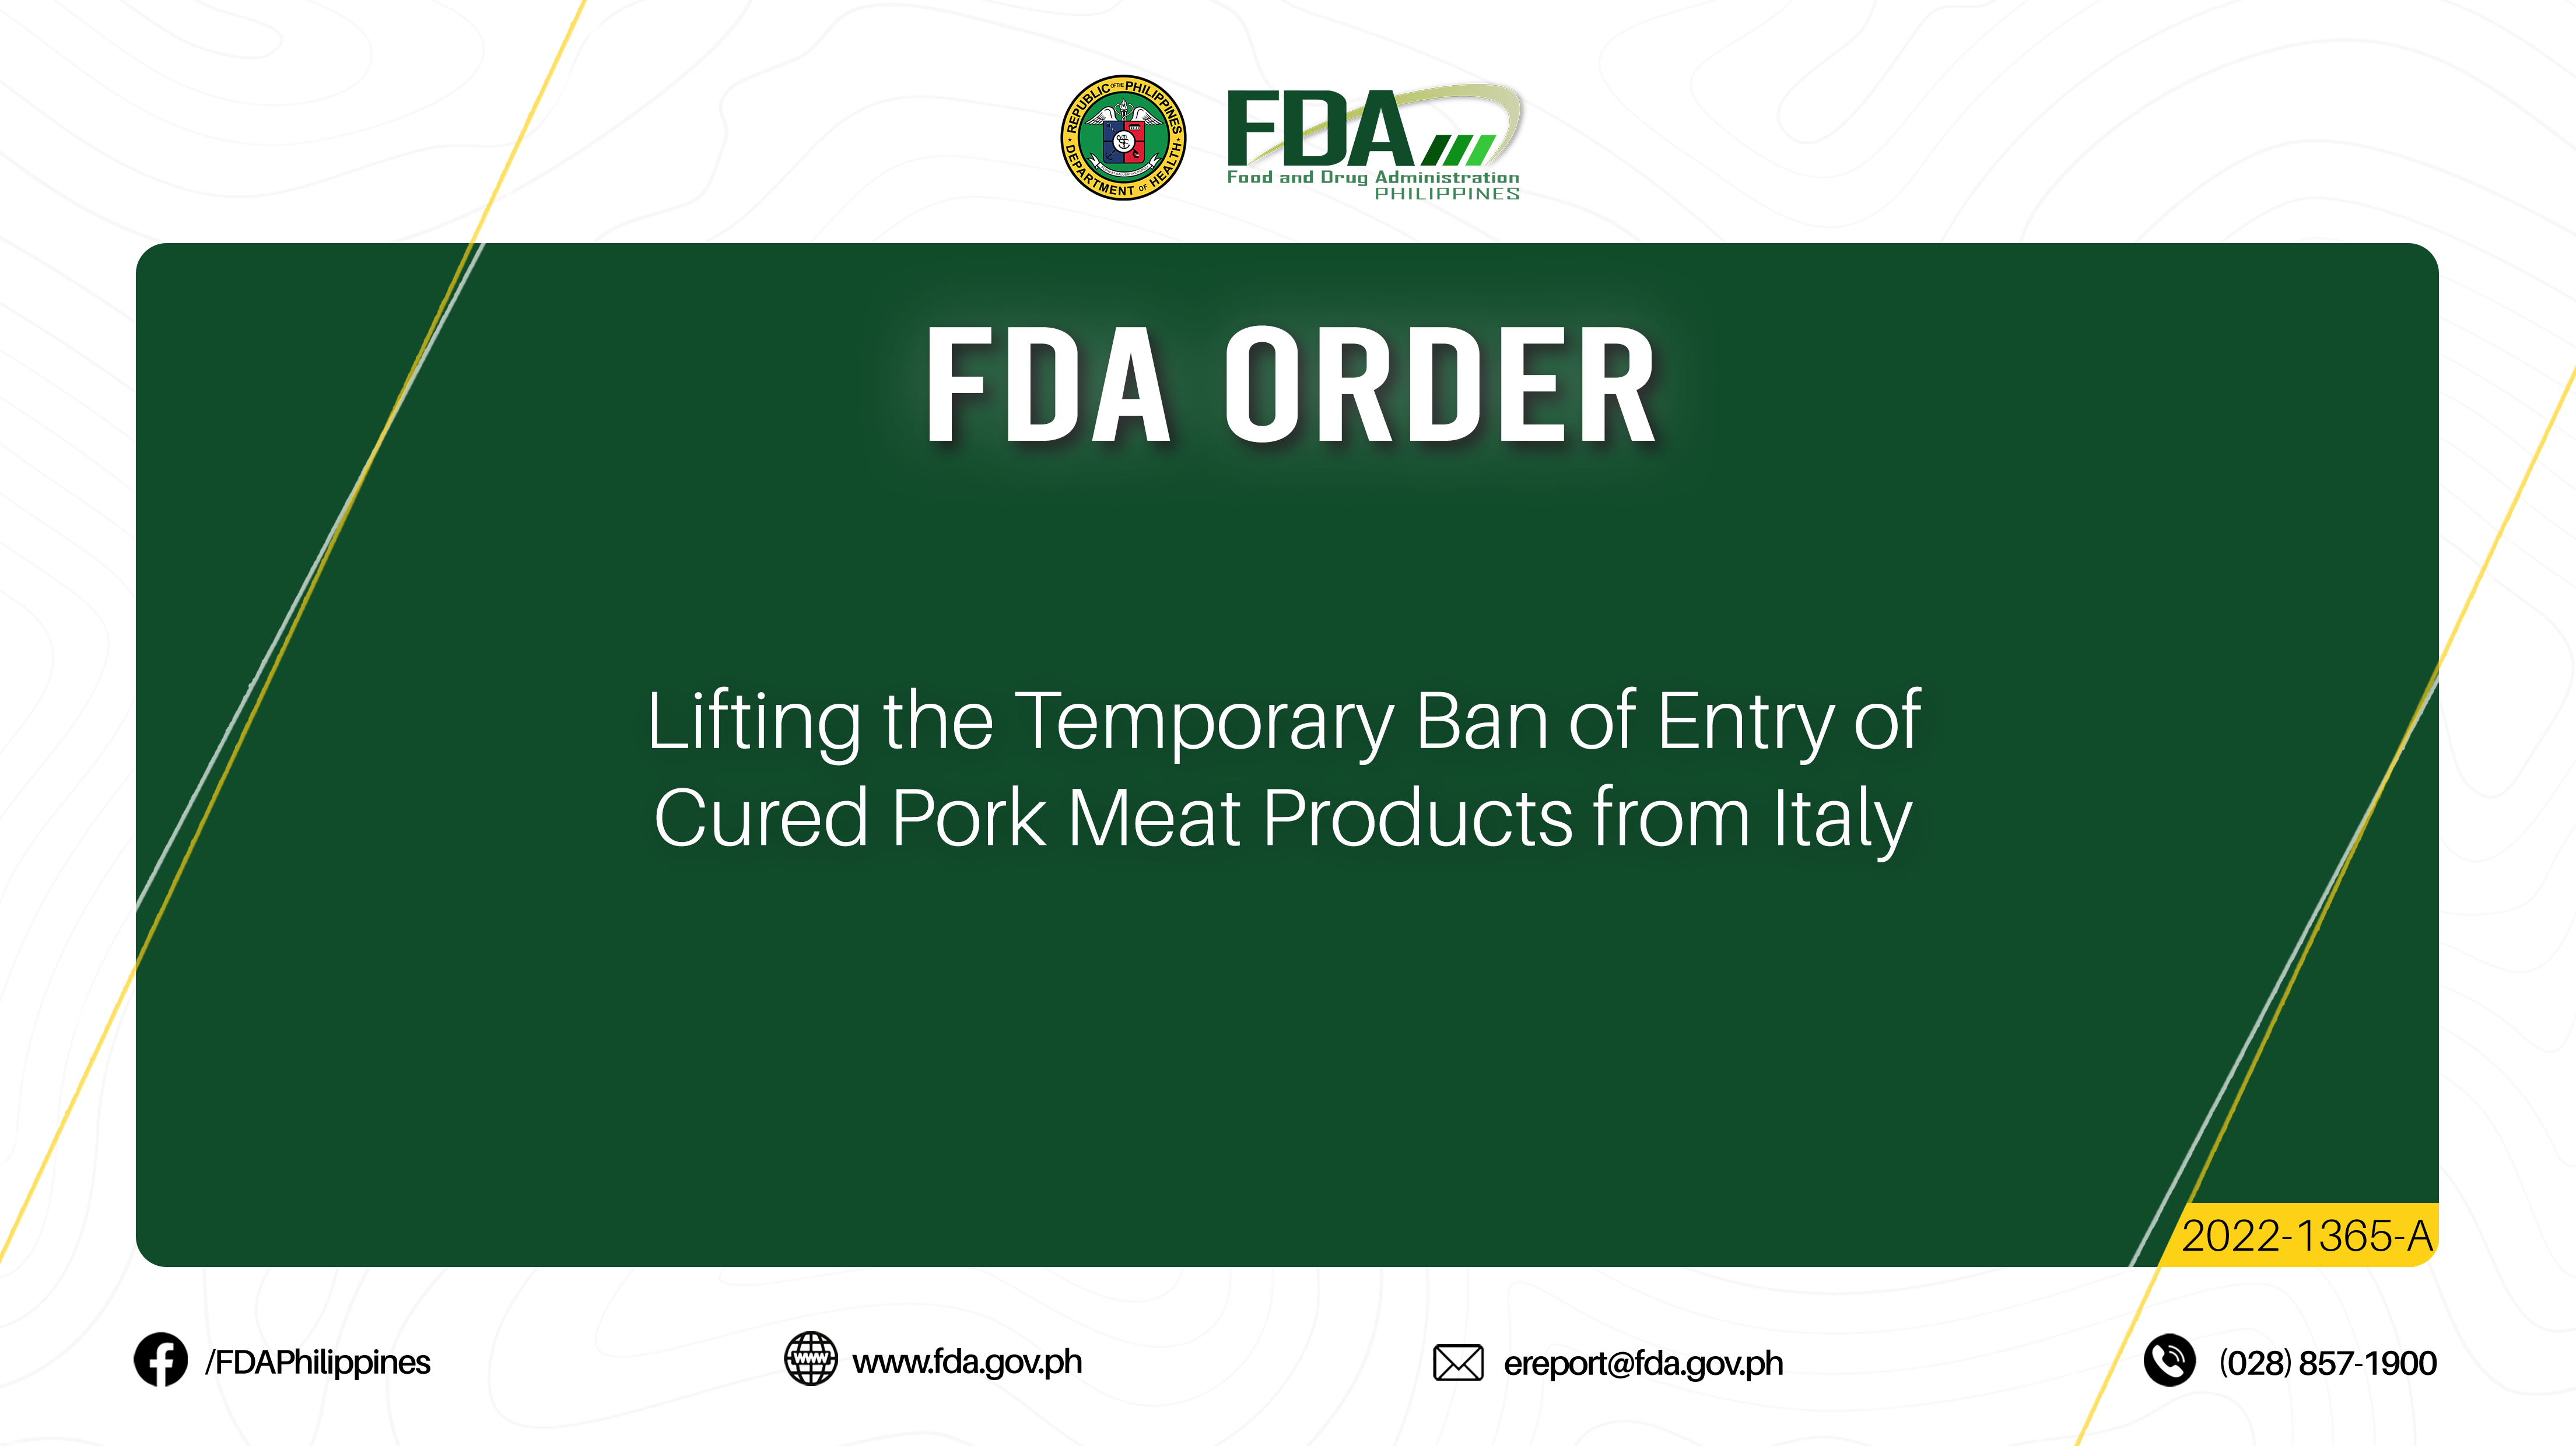 FDA ORDER No.2022-1365-A || Lifting the Temporary Ban of Entry of Cured Pork Meat Products from Italy